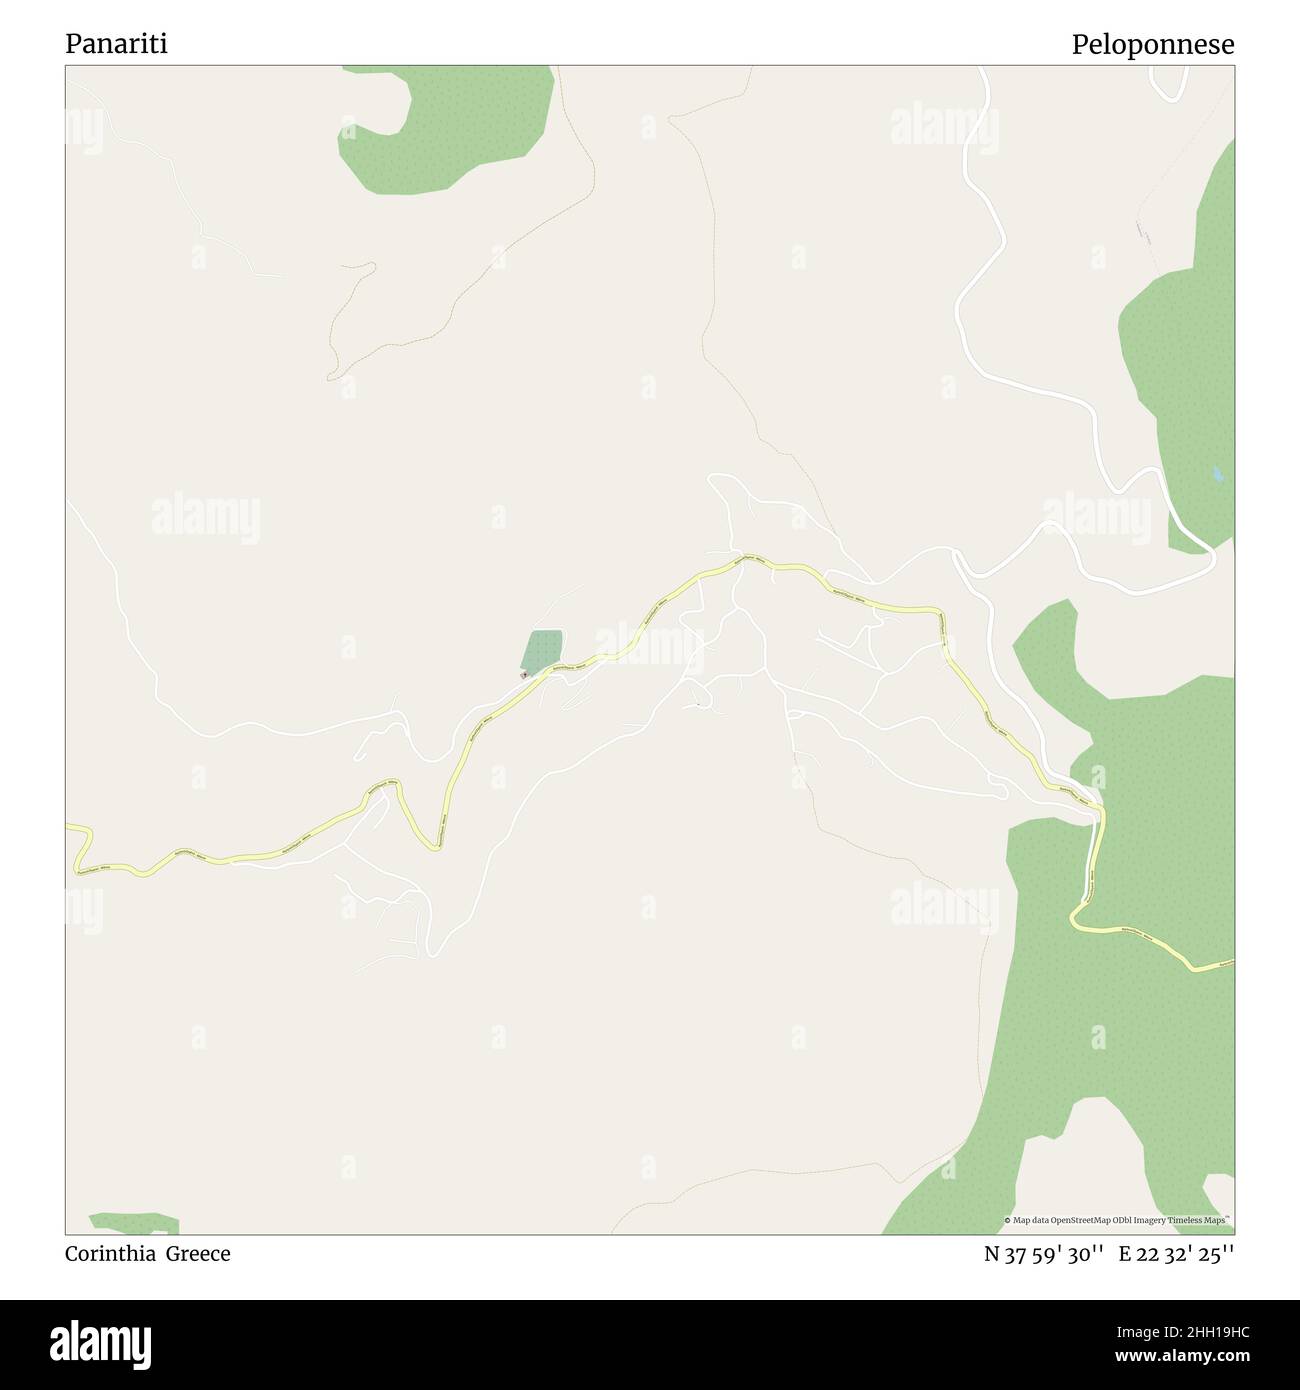 Panariti, Corinthia, Greece, Peloponnese, N 37 59' 30'', E 22 32' 25'', map, Timeless Map published in 2021. Travelers, explorers and adventurers like Florence Nightingale, David Livingstone, Ernest Shackleton, Lewis and Clark and Sherlock Holmes relied on maps to plan travels to the world's most remote corners, Timeless Maps is mapping most locations on the globe, showing the achievement of great dreams Stock Photo